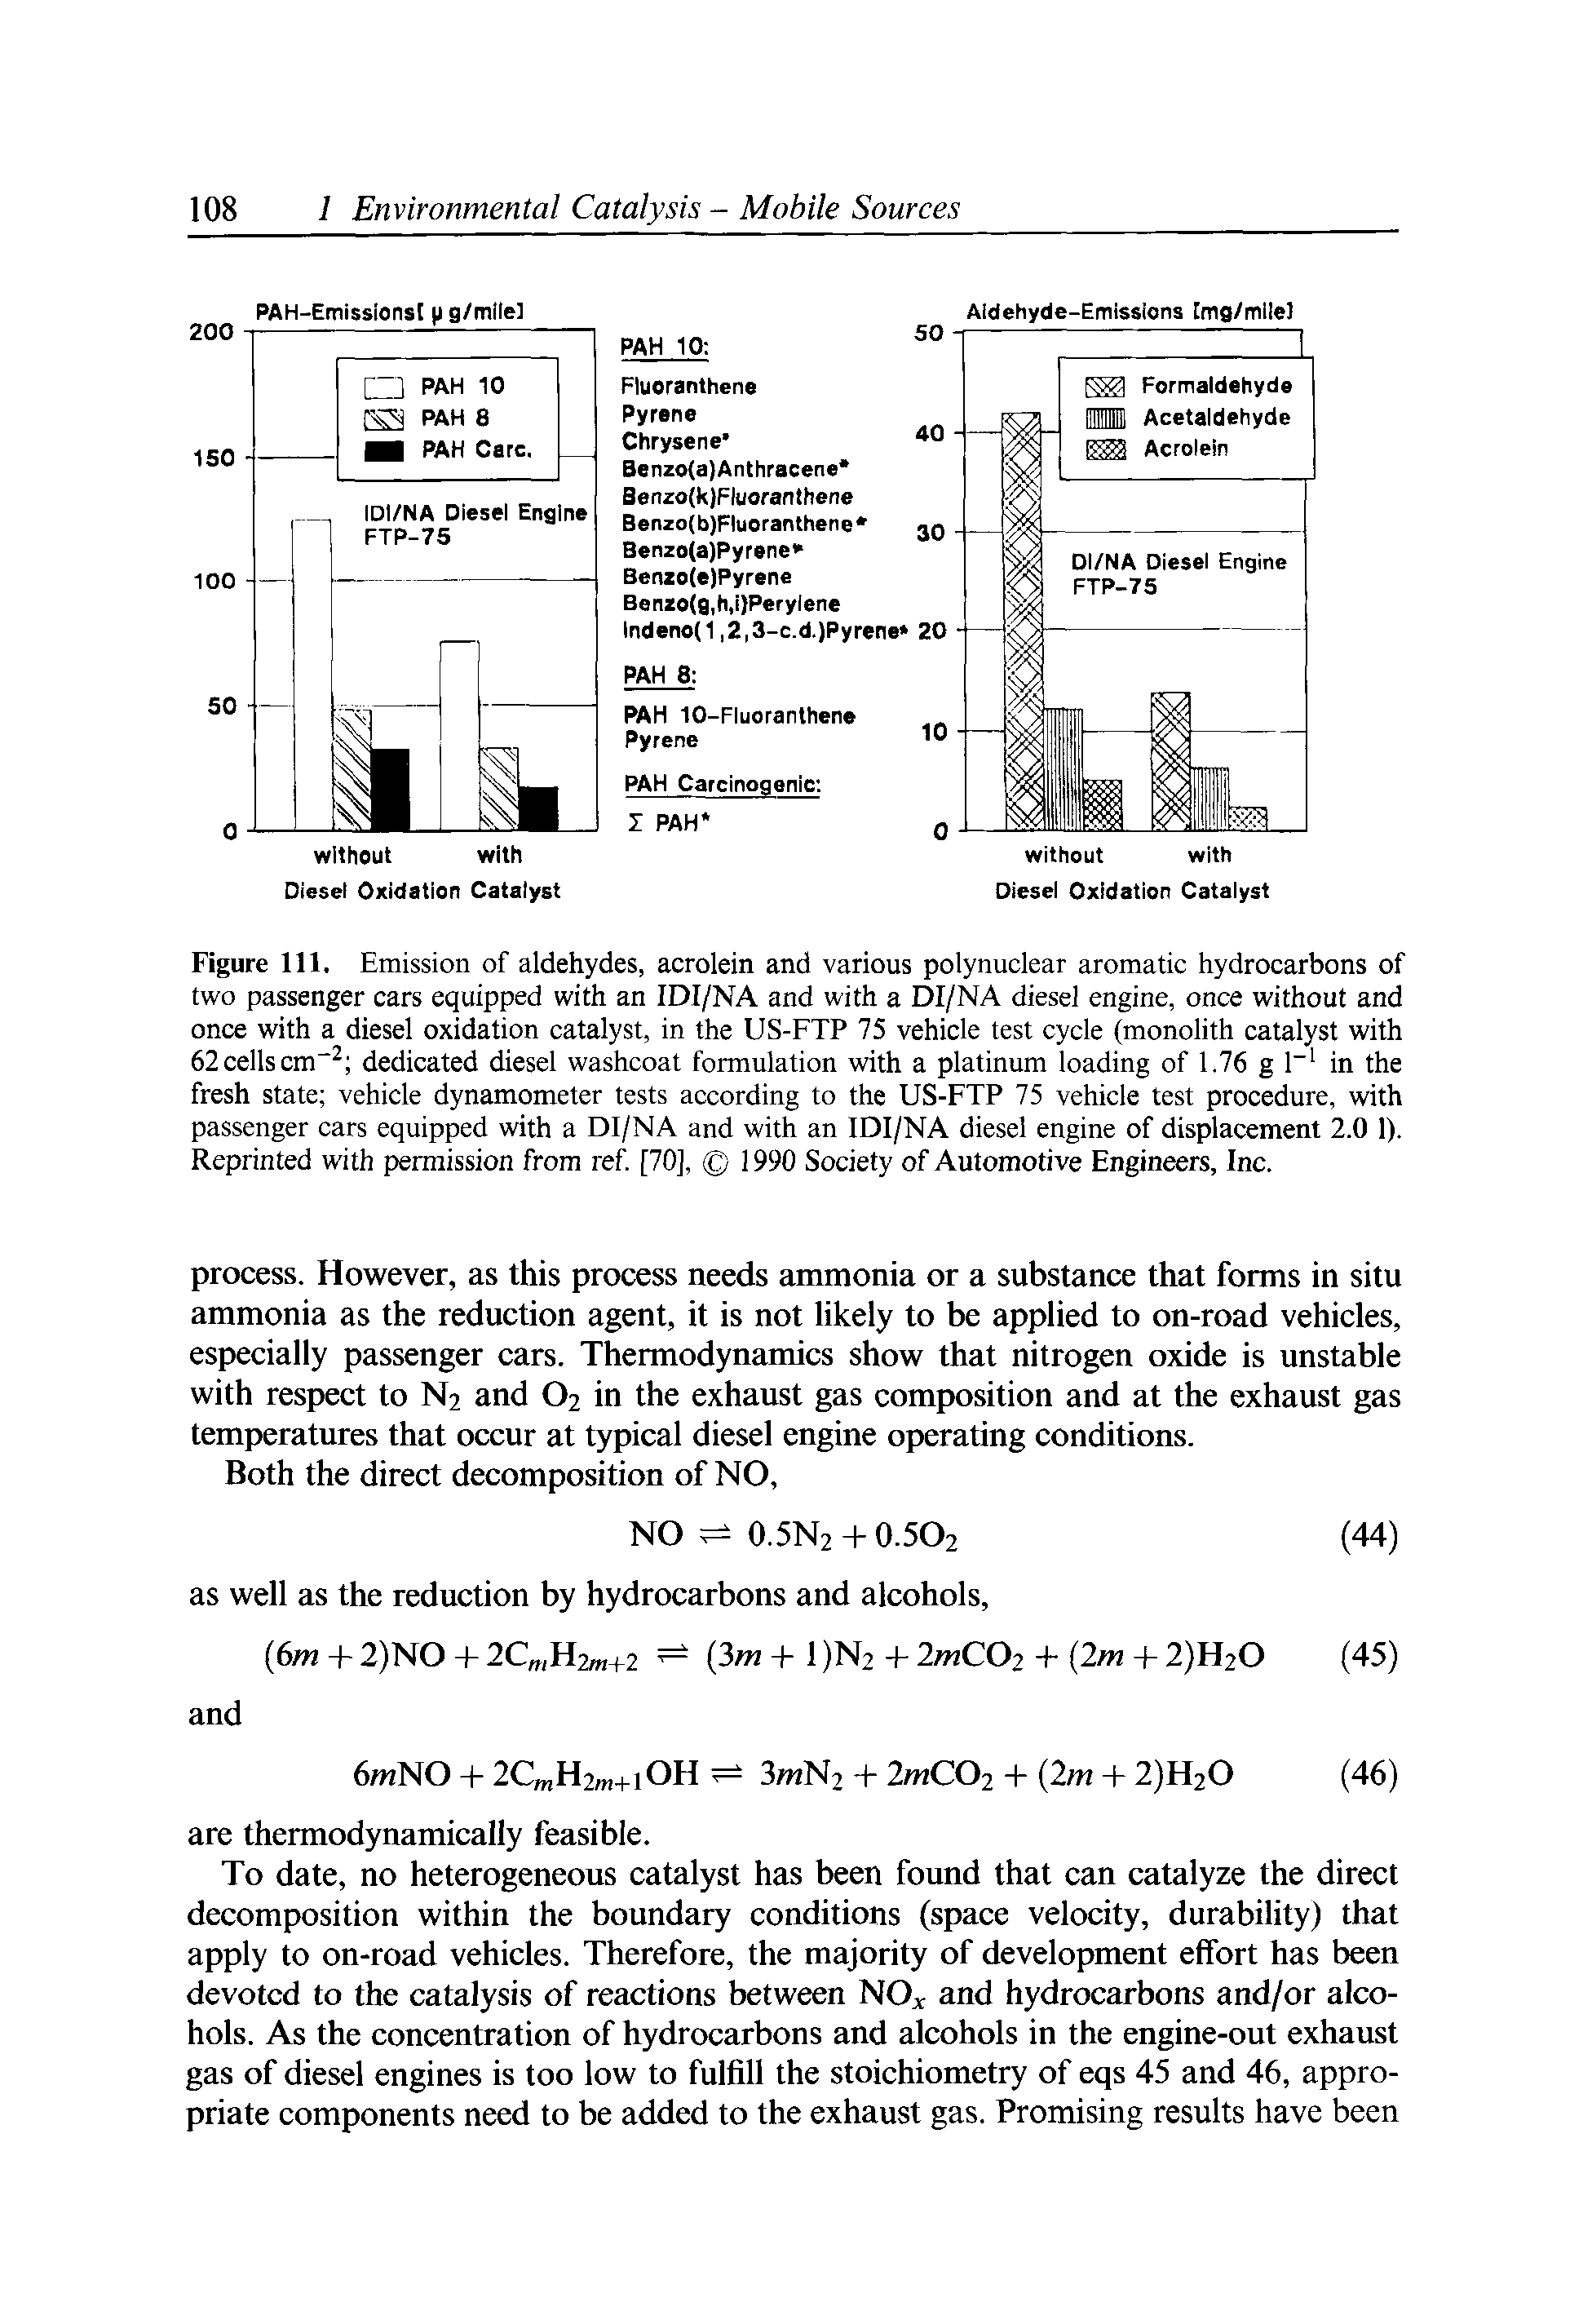 Figure 111. Emission of aldehydes, acrolein and various polynuclear aromatic hydrocarbons of two passenger cars equipped with an IDI/NA and with a DI/NA diesel engine, once without and once with a diesel oxidation catalyst, in the US-FTP 75 vehicle test cycle (monolith catalyst with 62 cells cm dedicated diesel washcoat formulation with a platinum loading of 1.76 g 1 in the fresh state vehicle dynamometer tests according to the US-FTP 75 vehicle test procedure, with passenger cars equipped with a DI/NA and with an IDI/NA diesel engine of displacement 2.0 1). Reprinted with permission from ref [70], 1990 Society of Automotive Engineers, Inc.